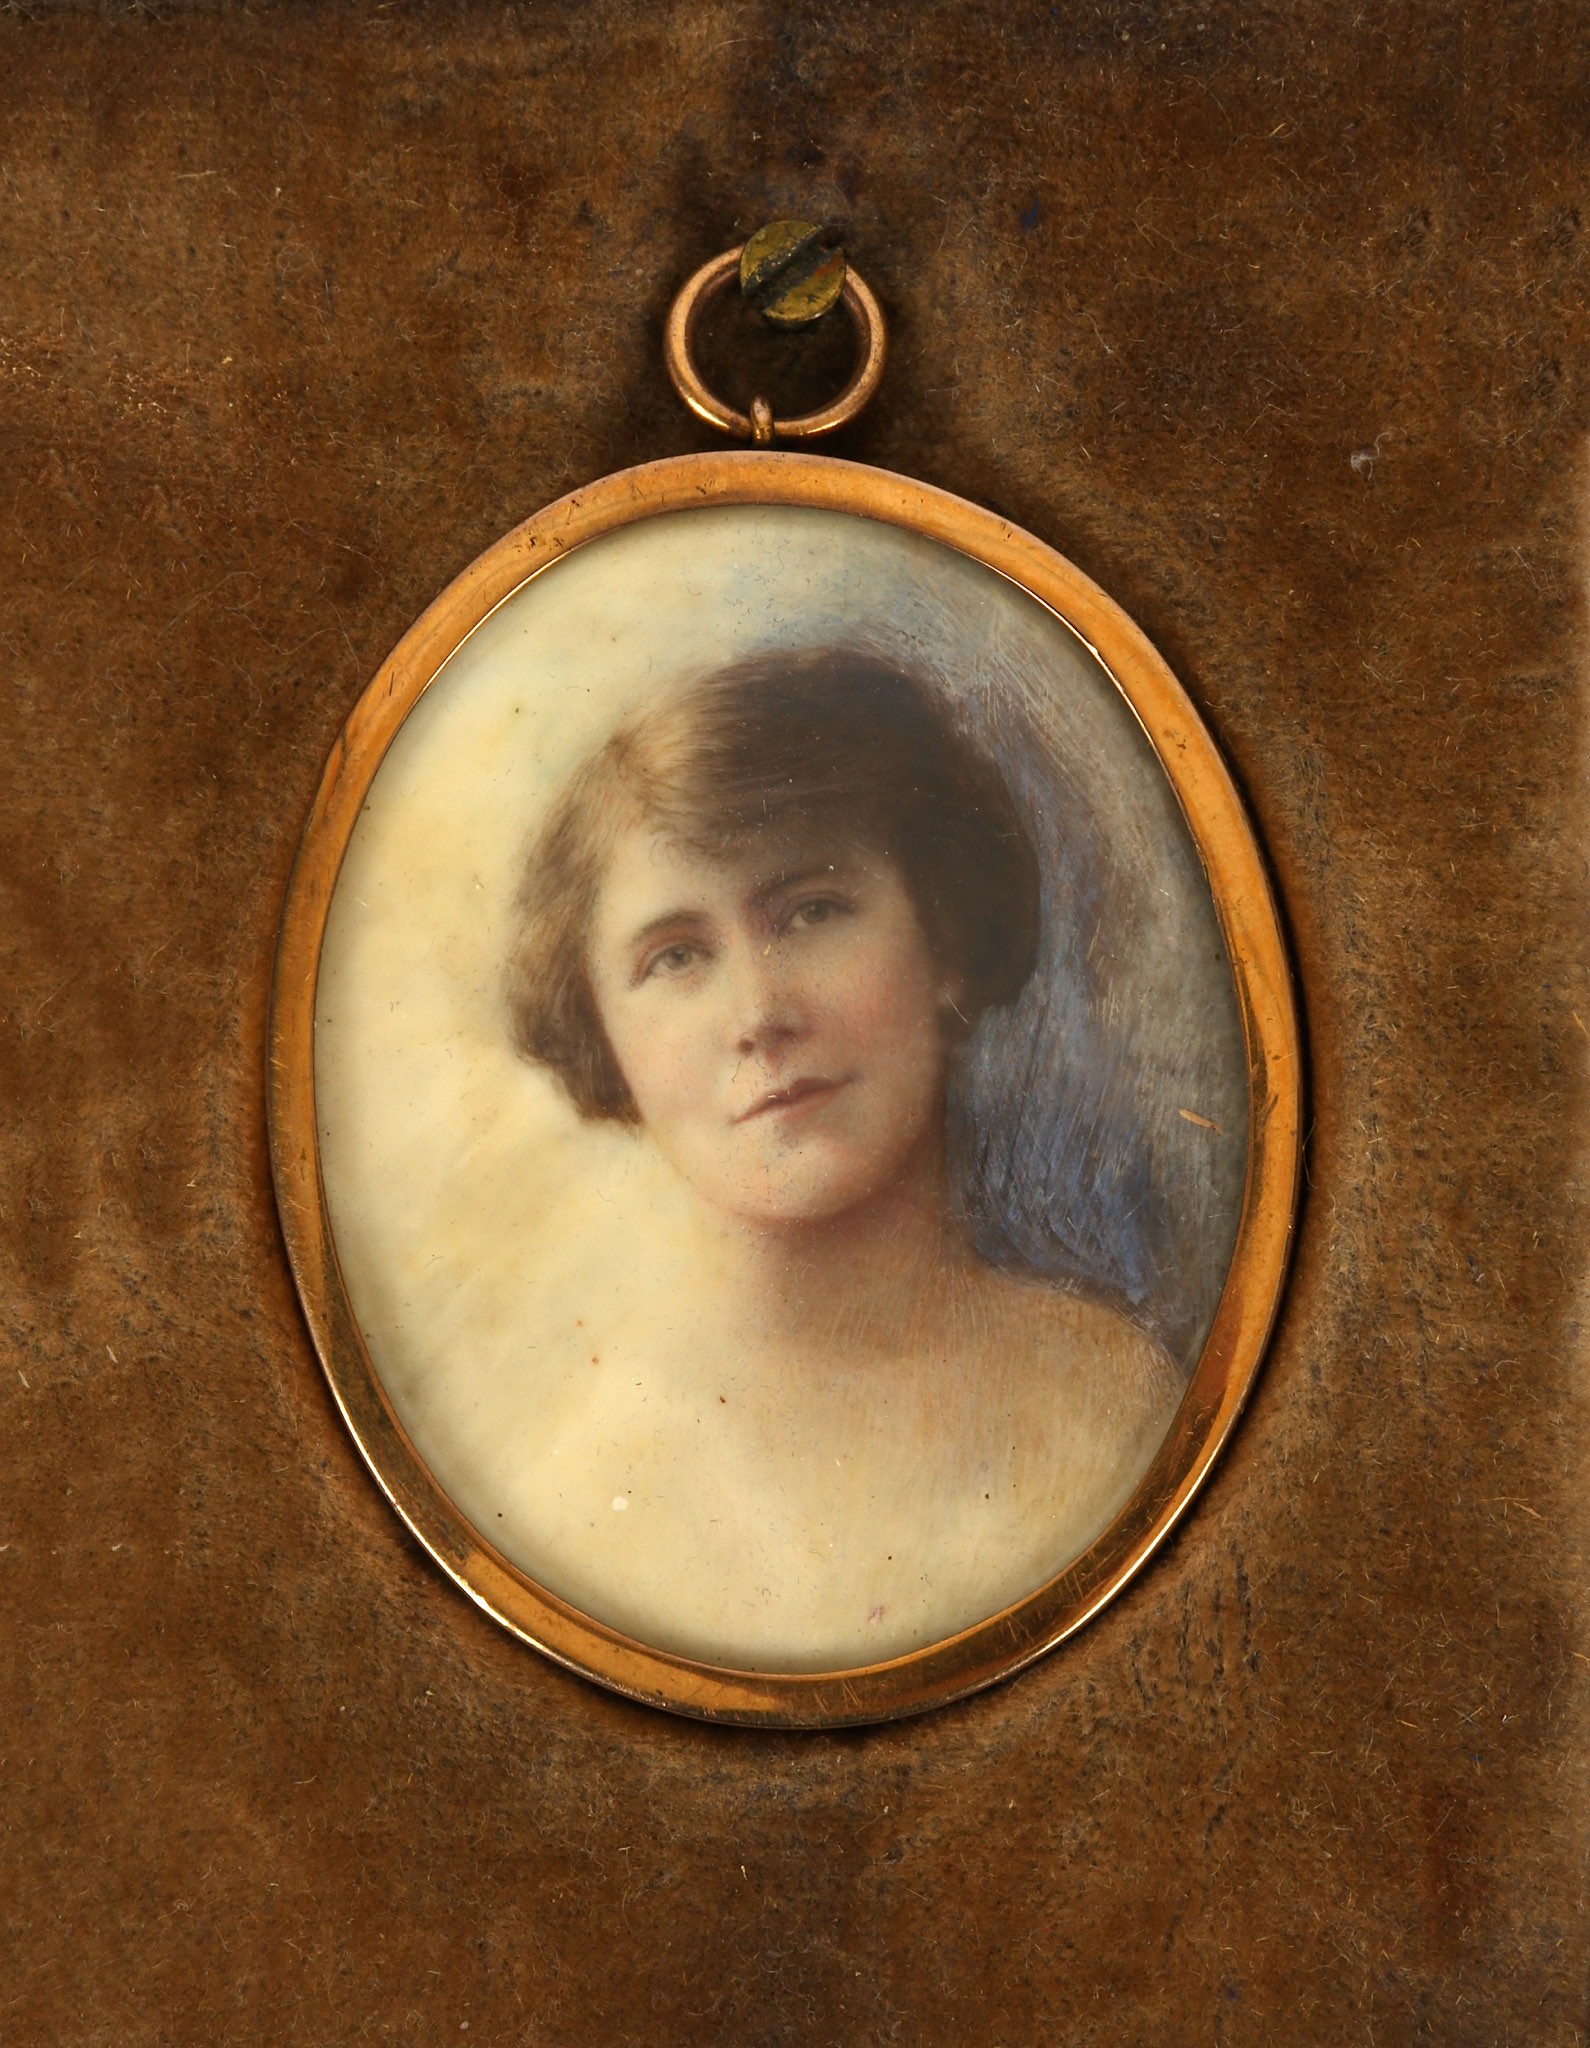 A late 19th century portrait miniature of a bare-shouldered young woman. In a rose gold oval